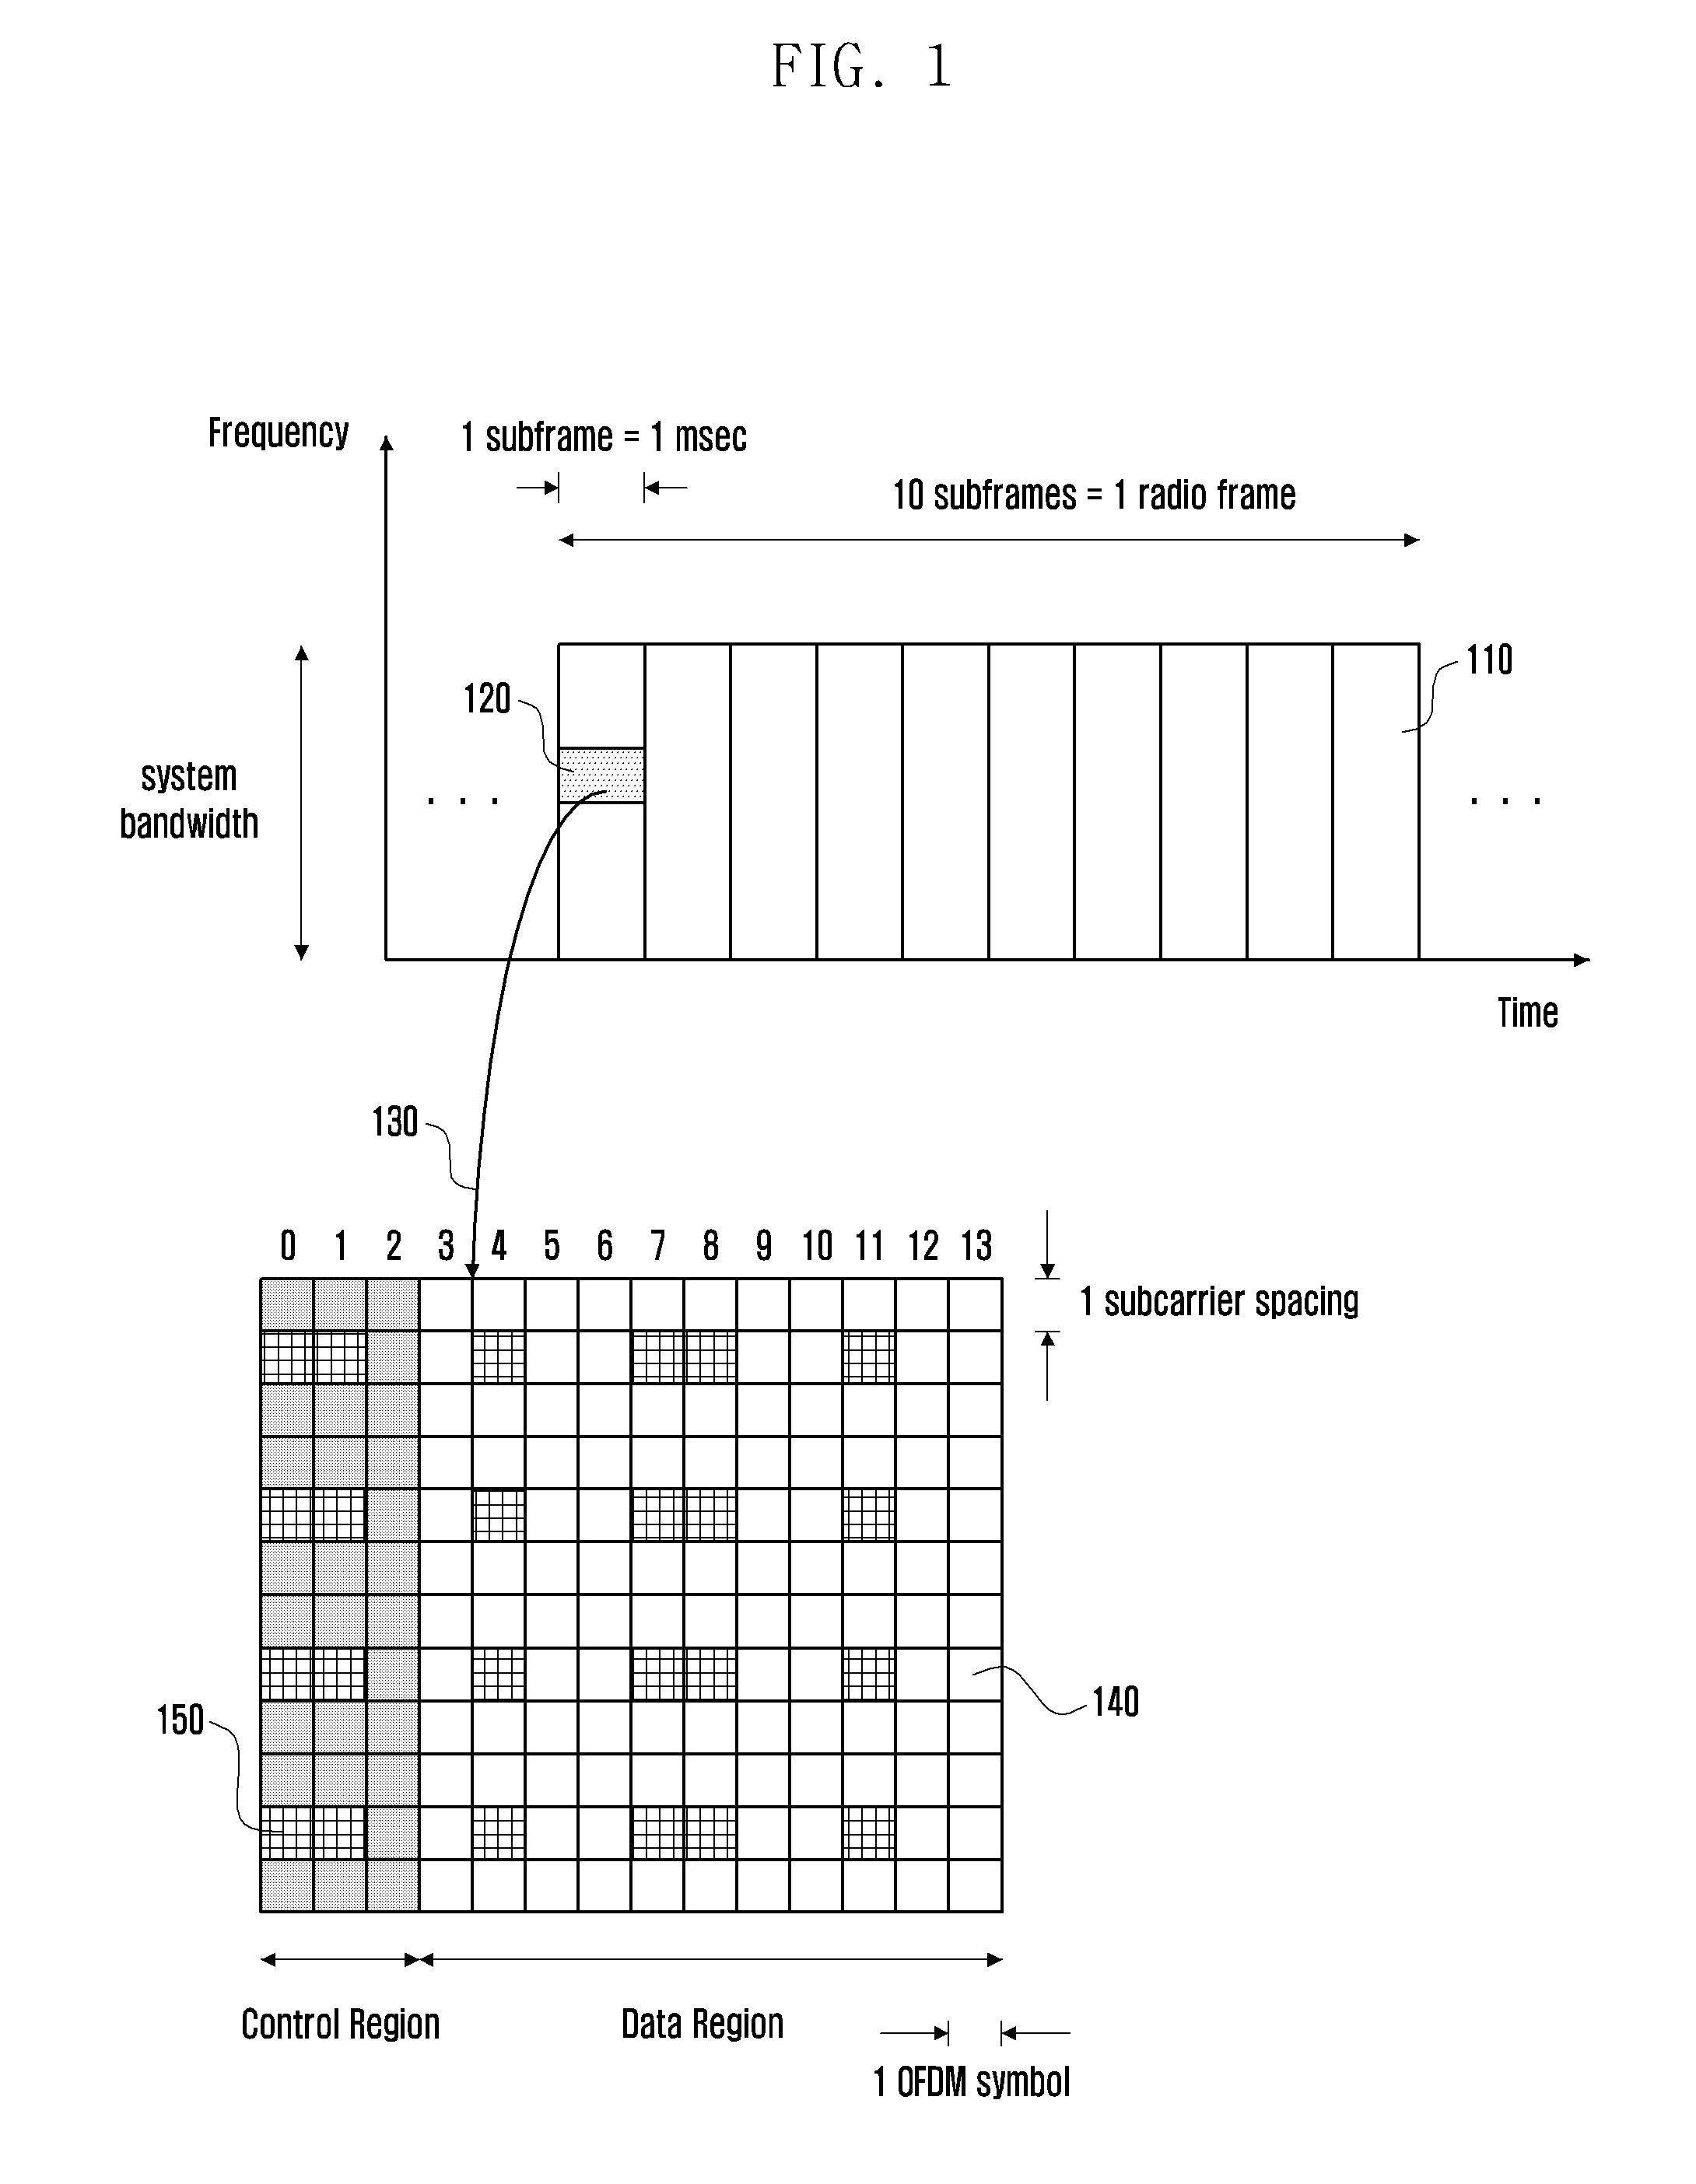 Method for processing csi-rs in wireless communication system